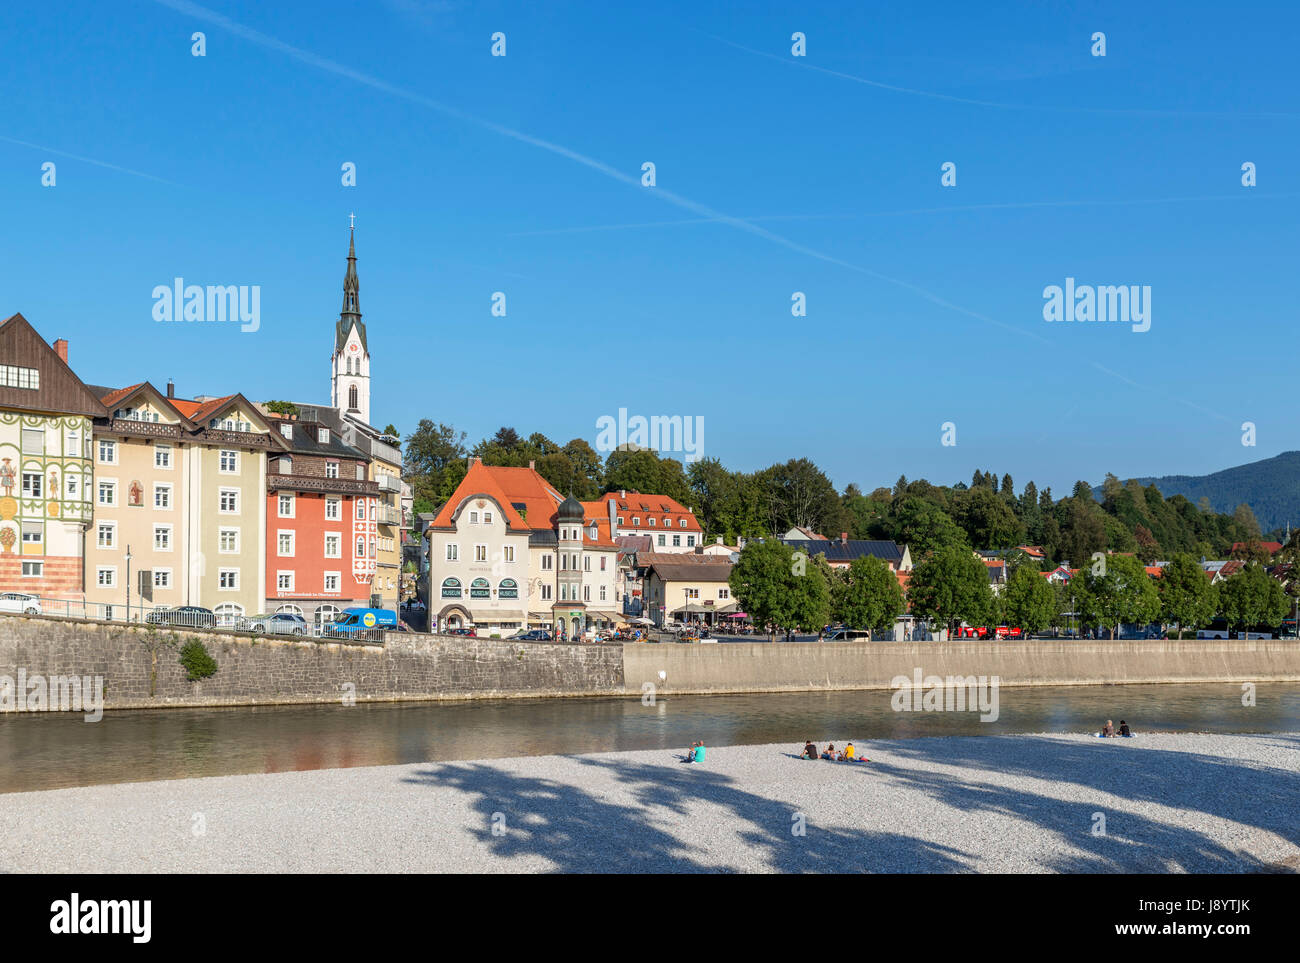 View towards the historic old town from the River Iser in the late afternoon, Bad Tölz, Bavaria, Germany Stock Photo